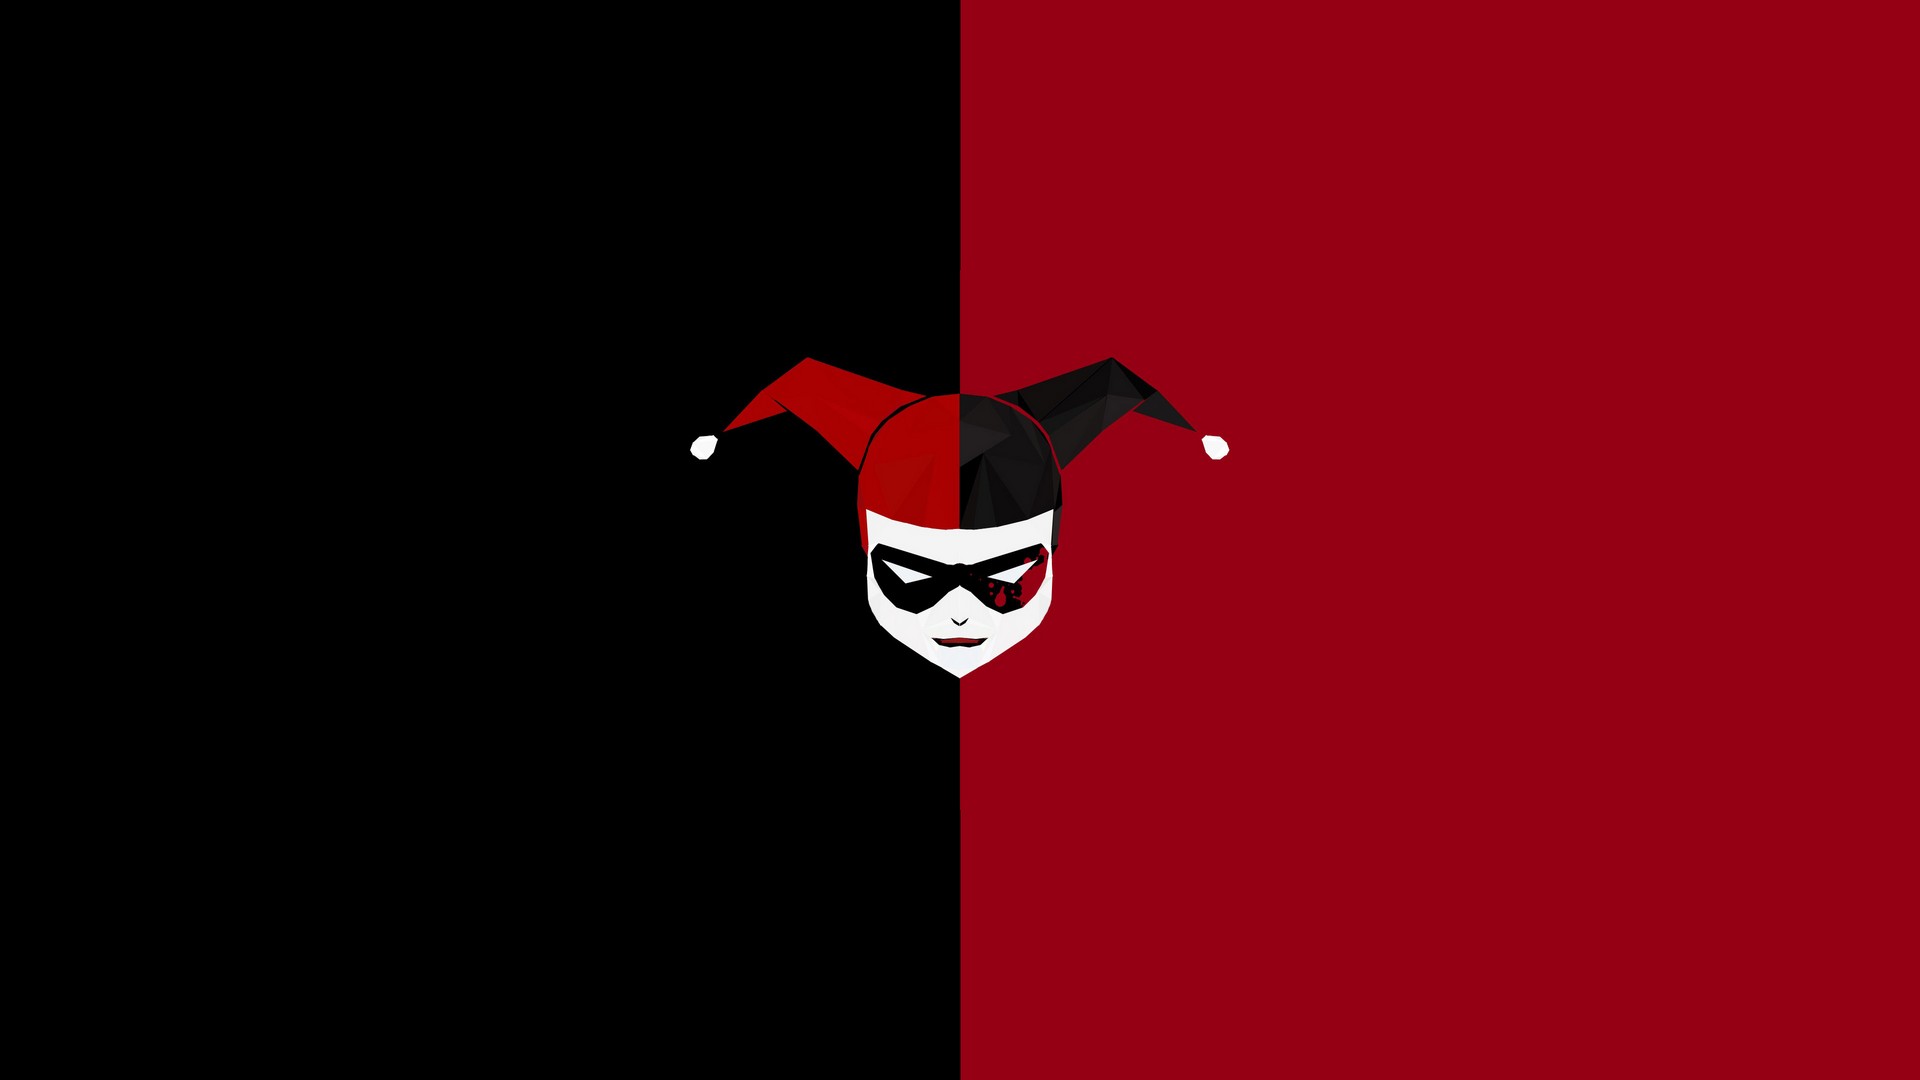 Wallpaper Harley Quinn Pictures Desktop with image resolution 1920x1080 pixel. You can use this wallpaper as background for your desktop Computer Screensavers, Android or iPhone smartphones